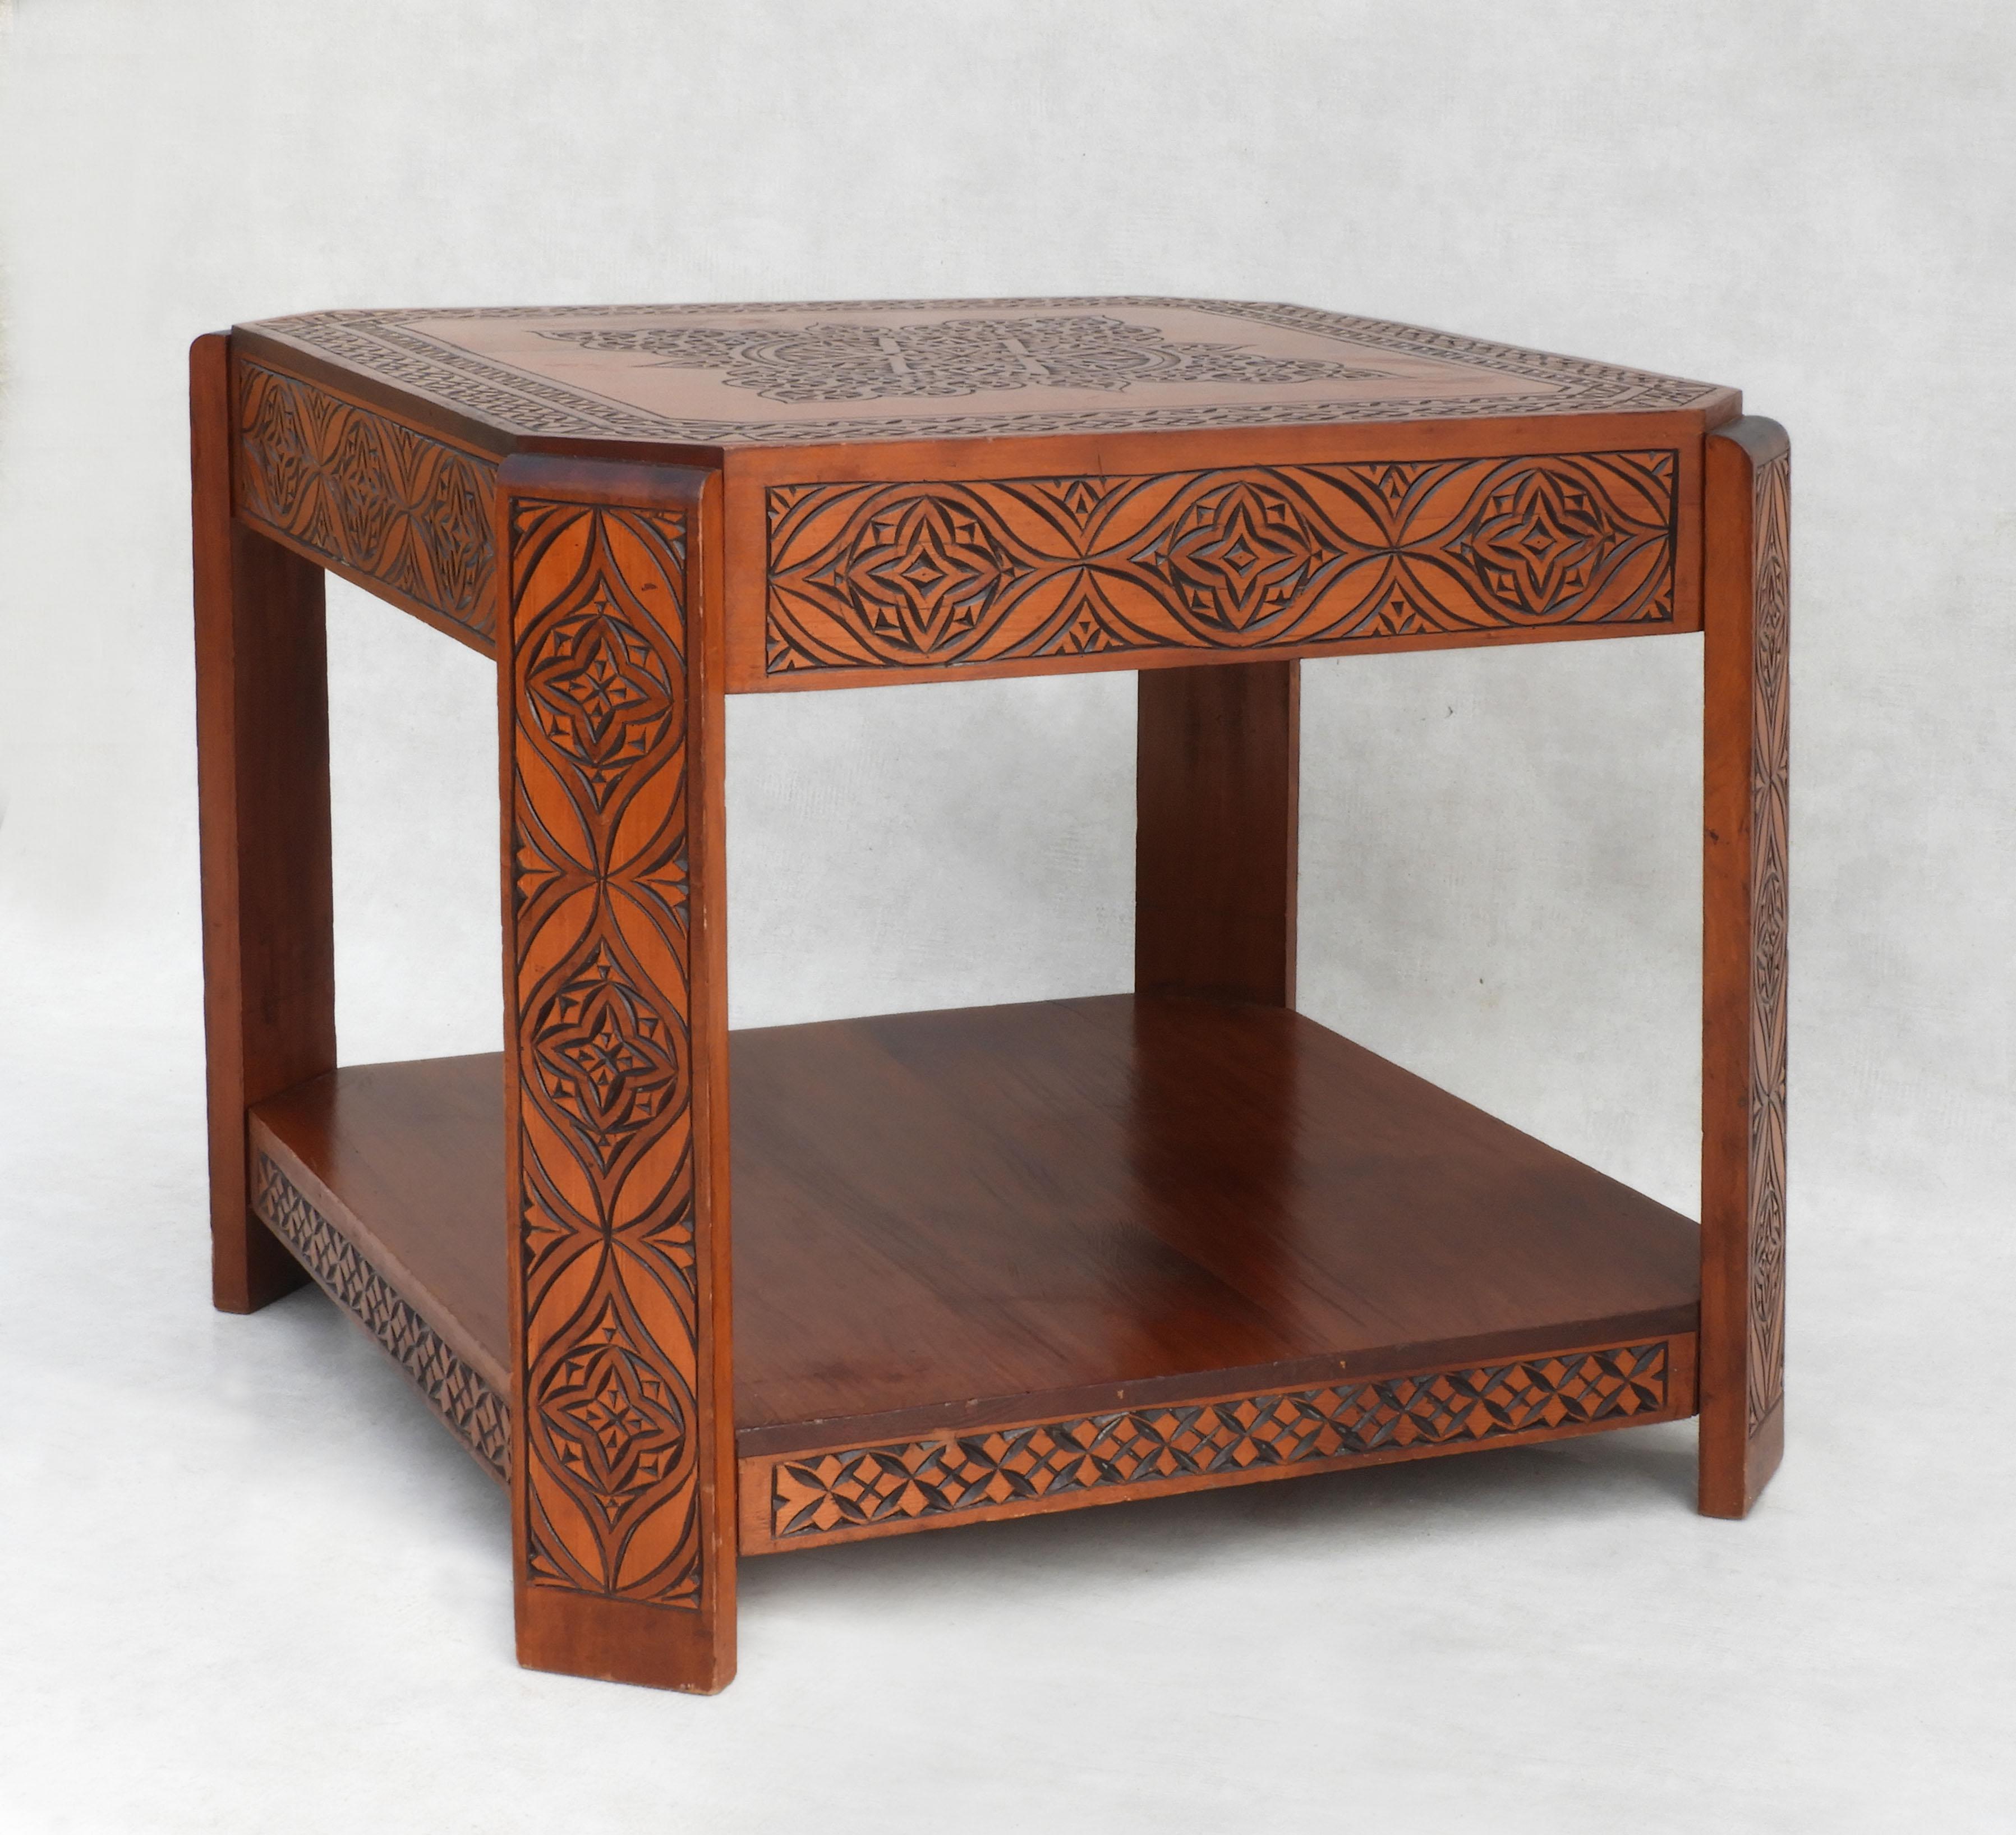 Vintage Moroccan hand-decorated coffee table C1950
Attractive two-tier square format with late Art Deco style curved accents.
Hand-carved with Moorish floral and geometrical designs.
A nice Bohemian accent addition to any room.  In good vintage